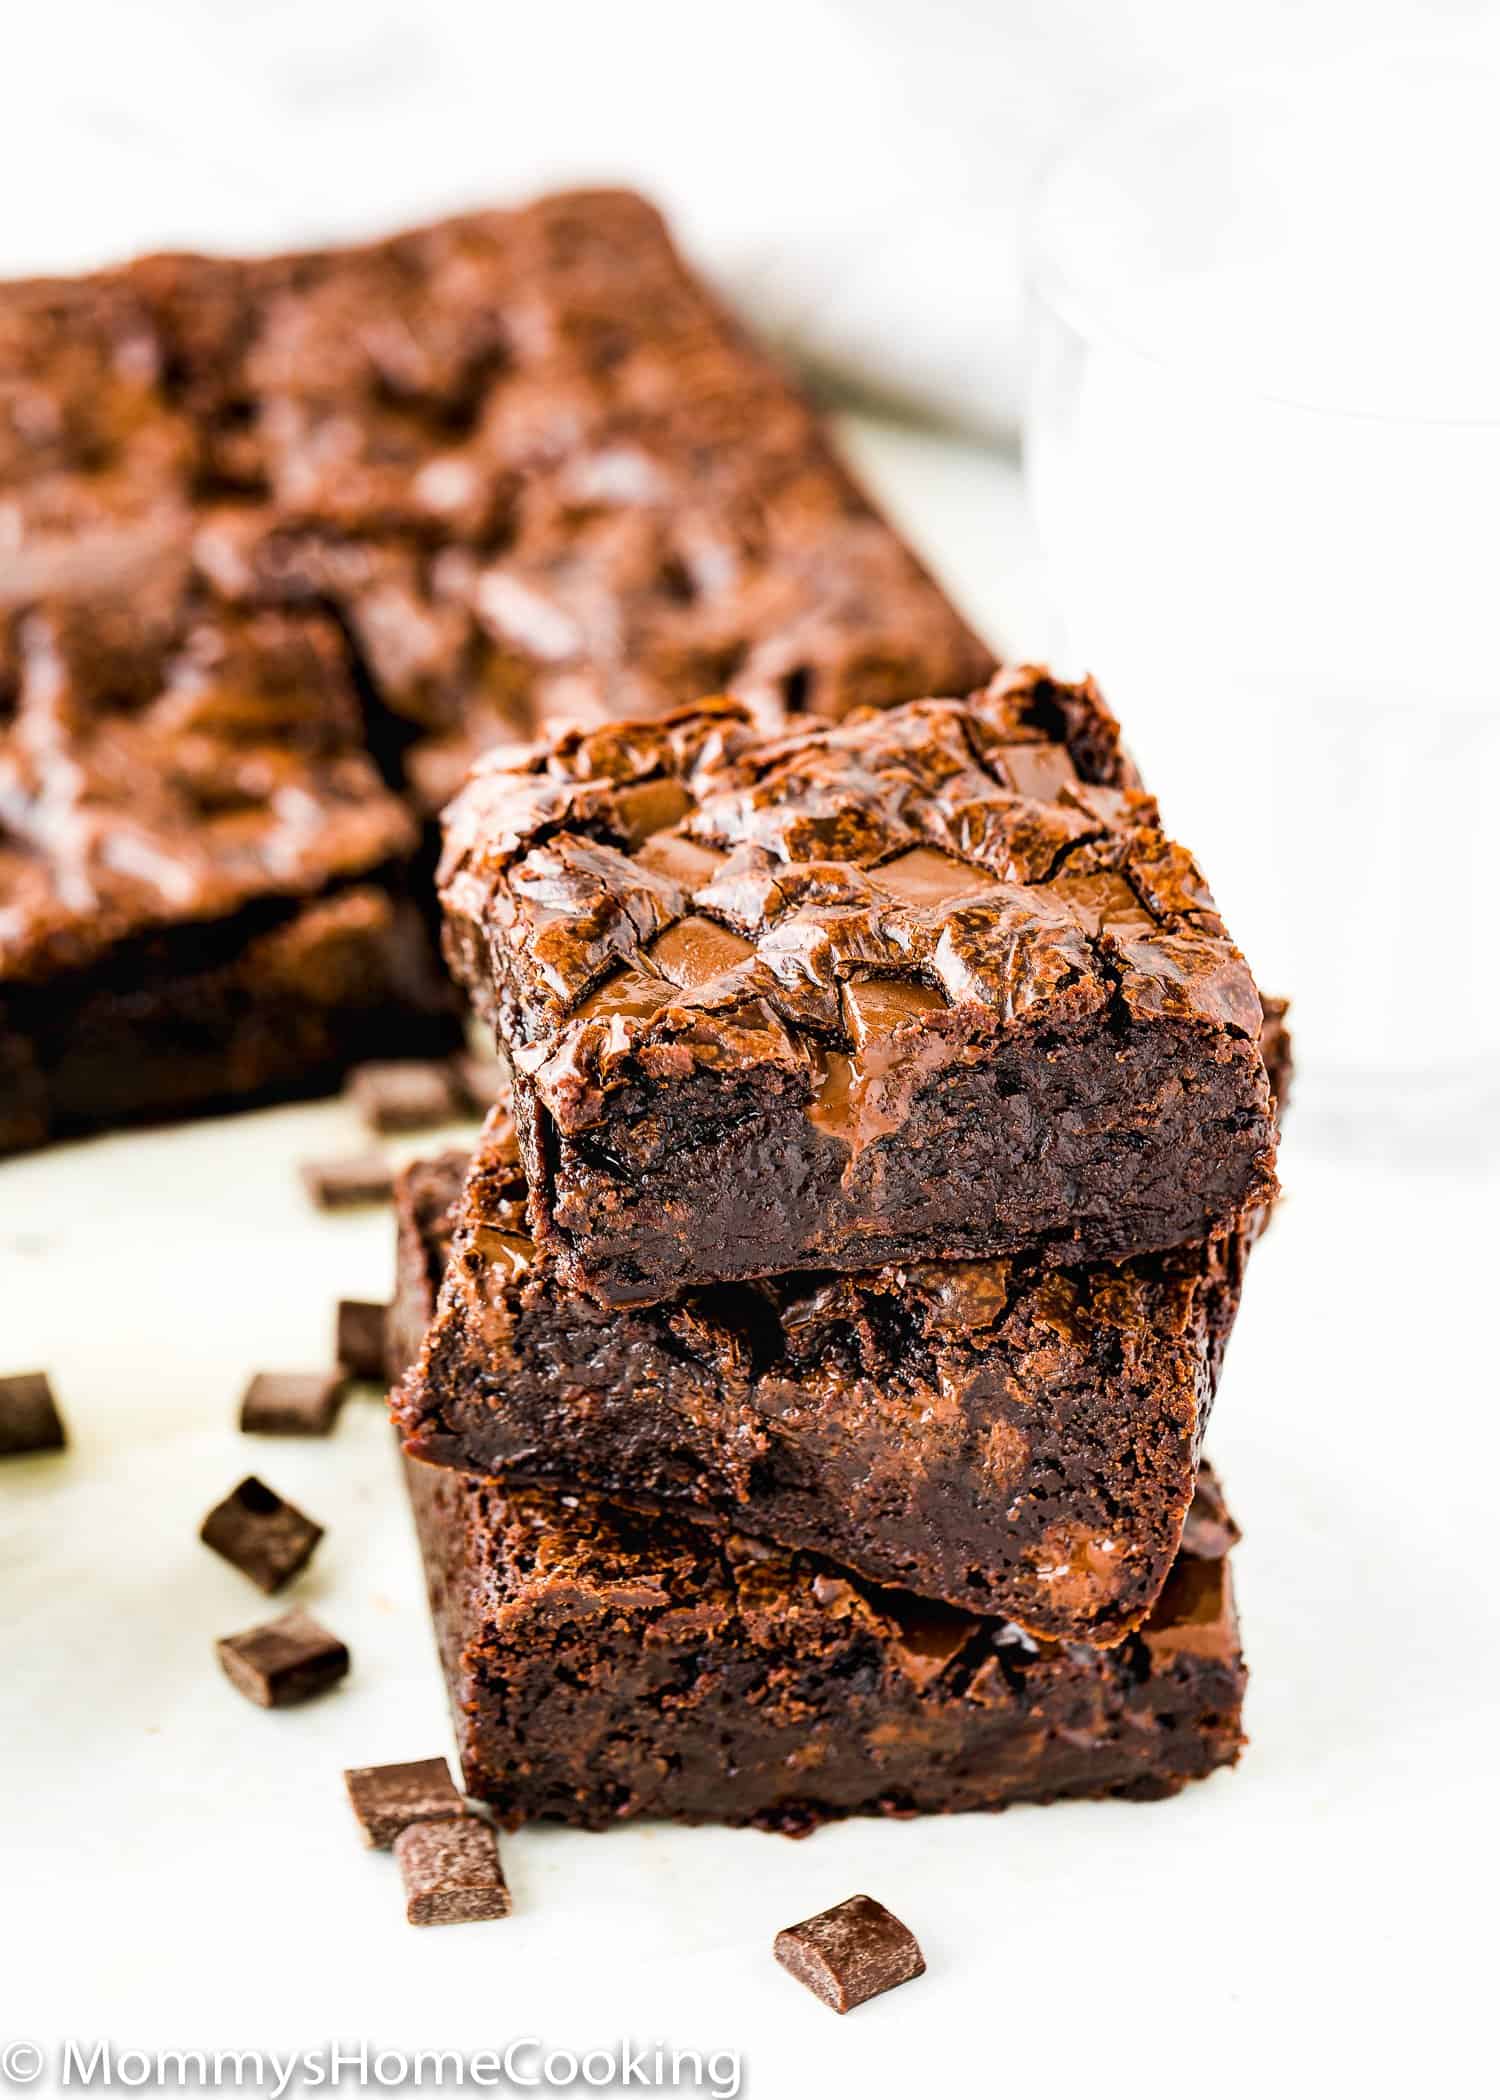 How to Make Brownies Without Eggs